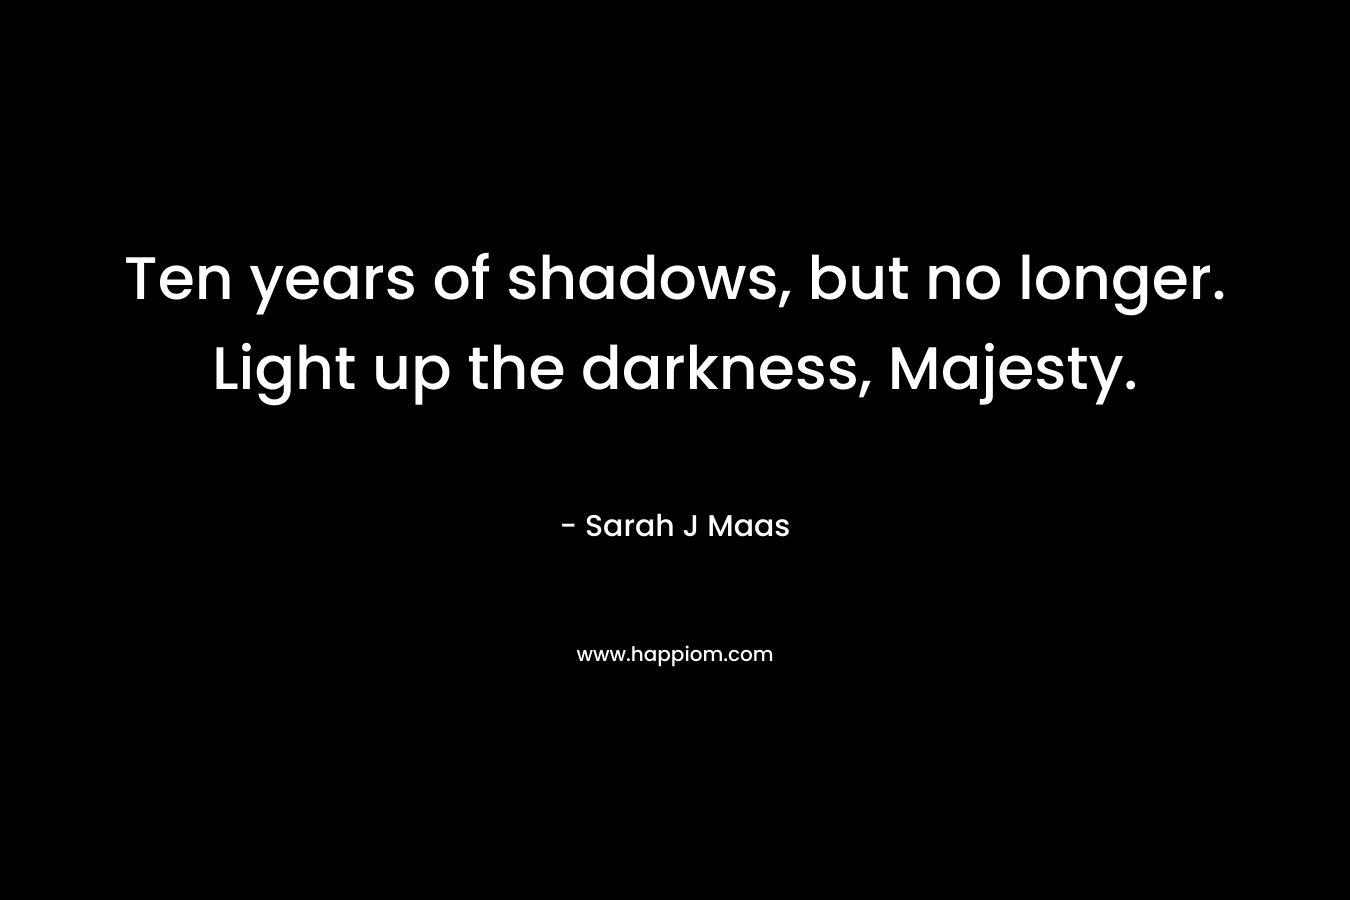 Ten years of shadows, but no longer. Light up the darkness, Majesty.